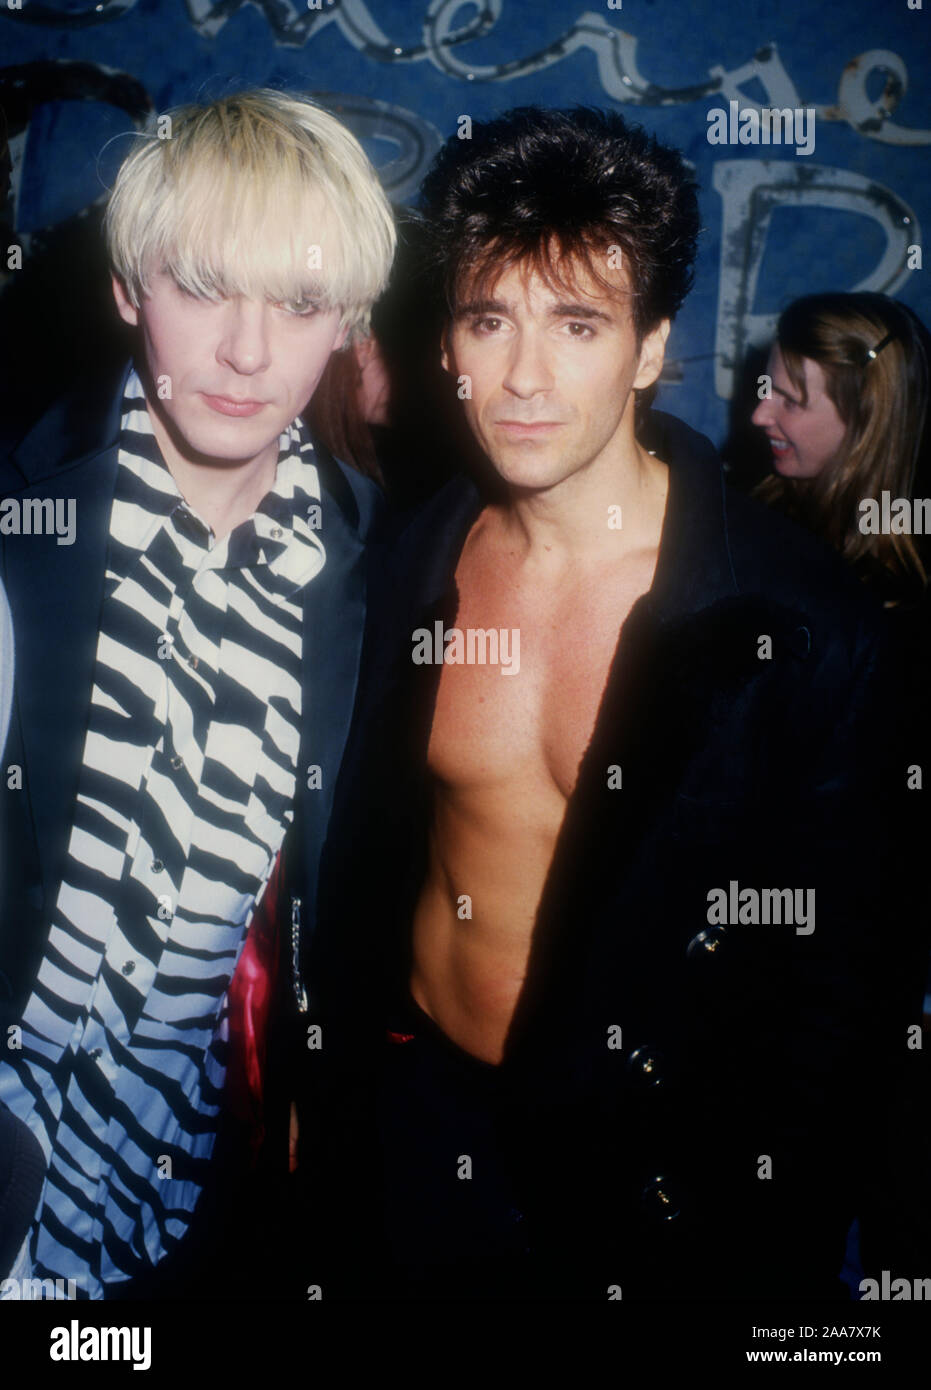 Las Vegas, Nevada, USA 10th March 1995 (L-R) Musicians Nick Rhodes and Warren Cuccurullo of Duran Duran attend the Grand Opening Celebration of the Hard Rock Hotel hosted by Peter Morgan on March 10, 1995 at The Hard Rock Hotel Las Vegas in Las Vegas, Nevada, USA. Photo by Barry King/Alamy Stock Photo Stock Photo